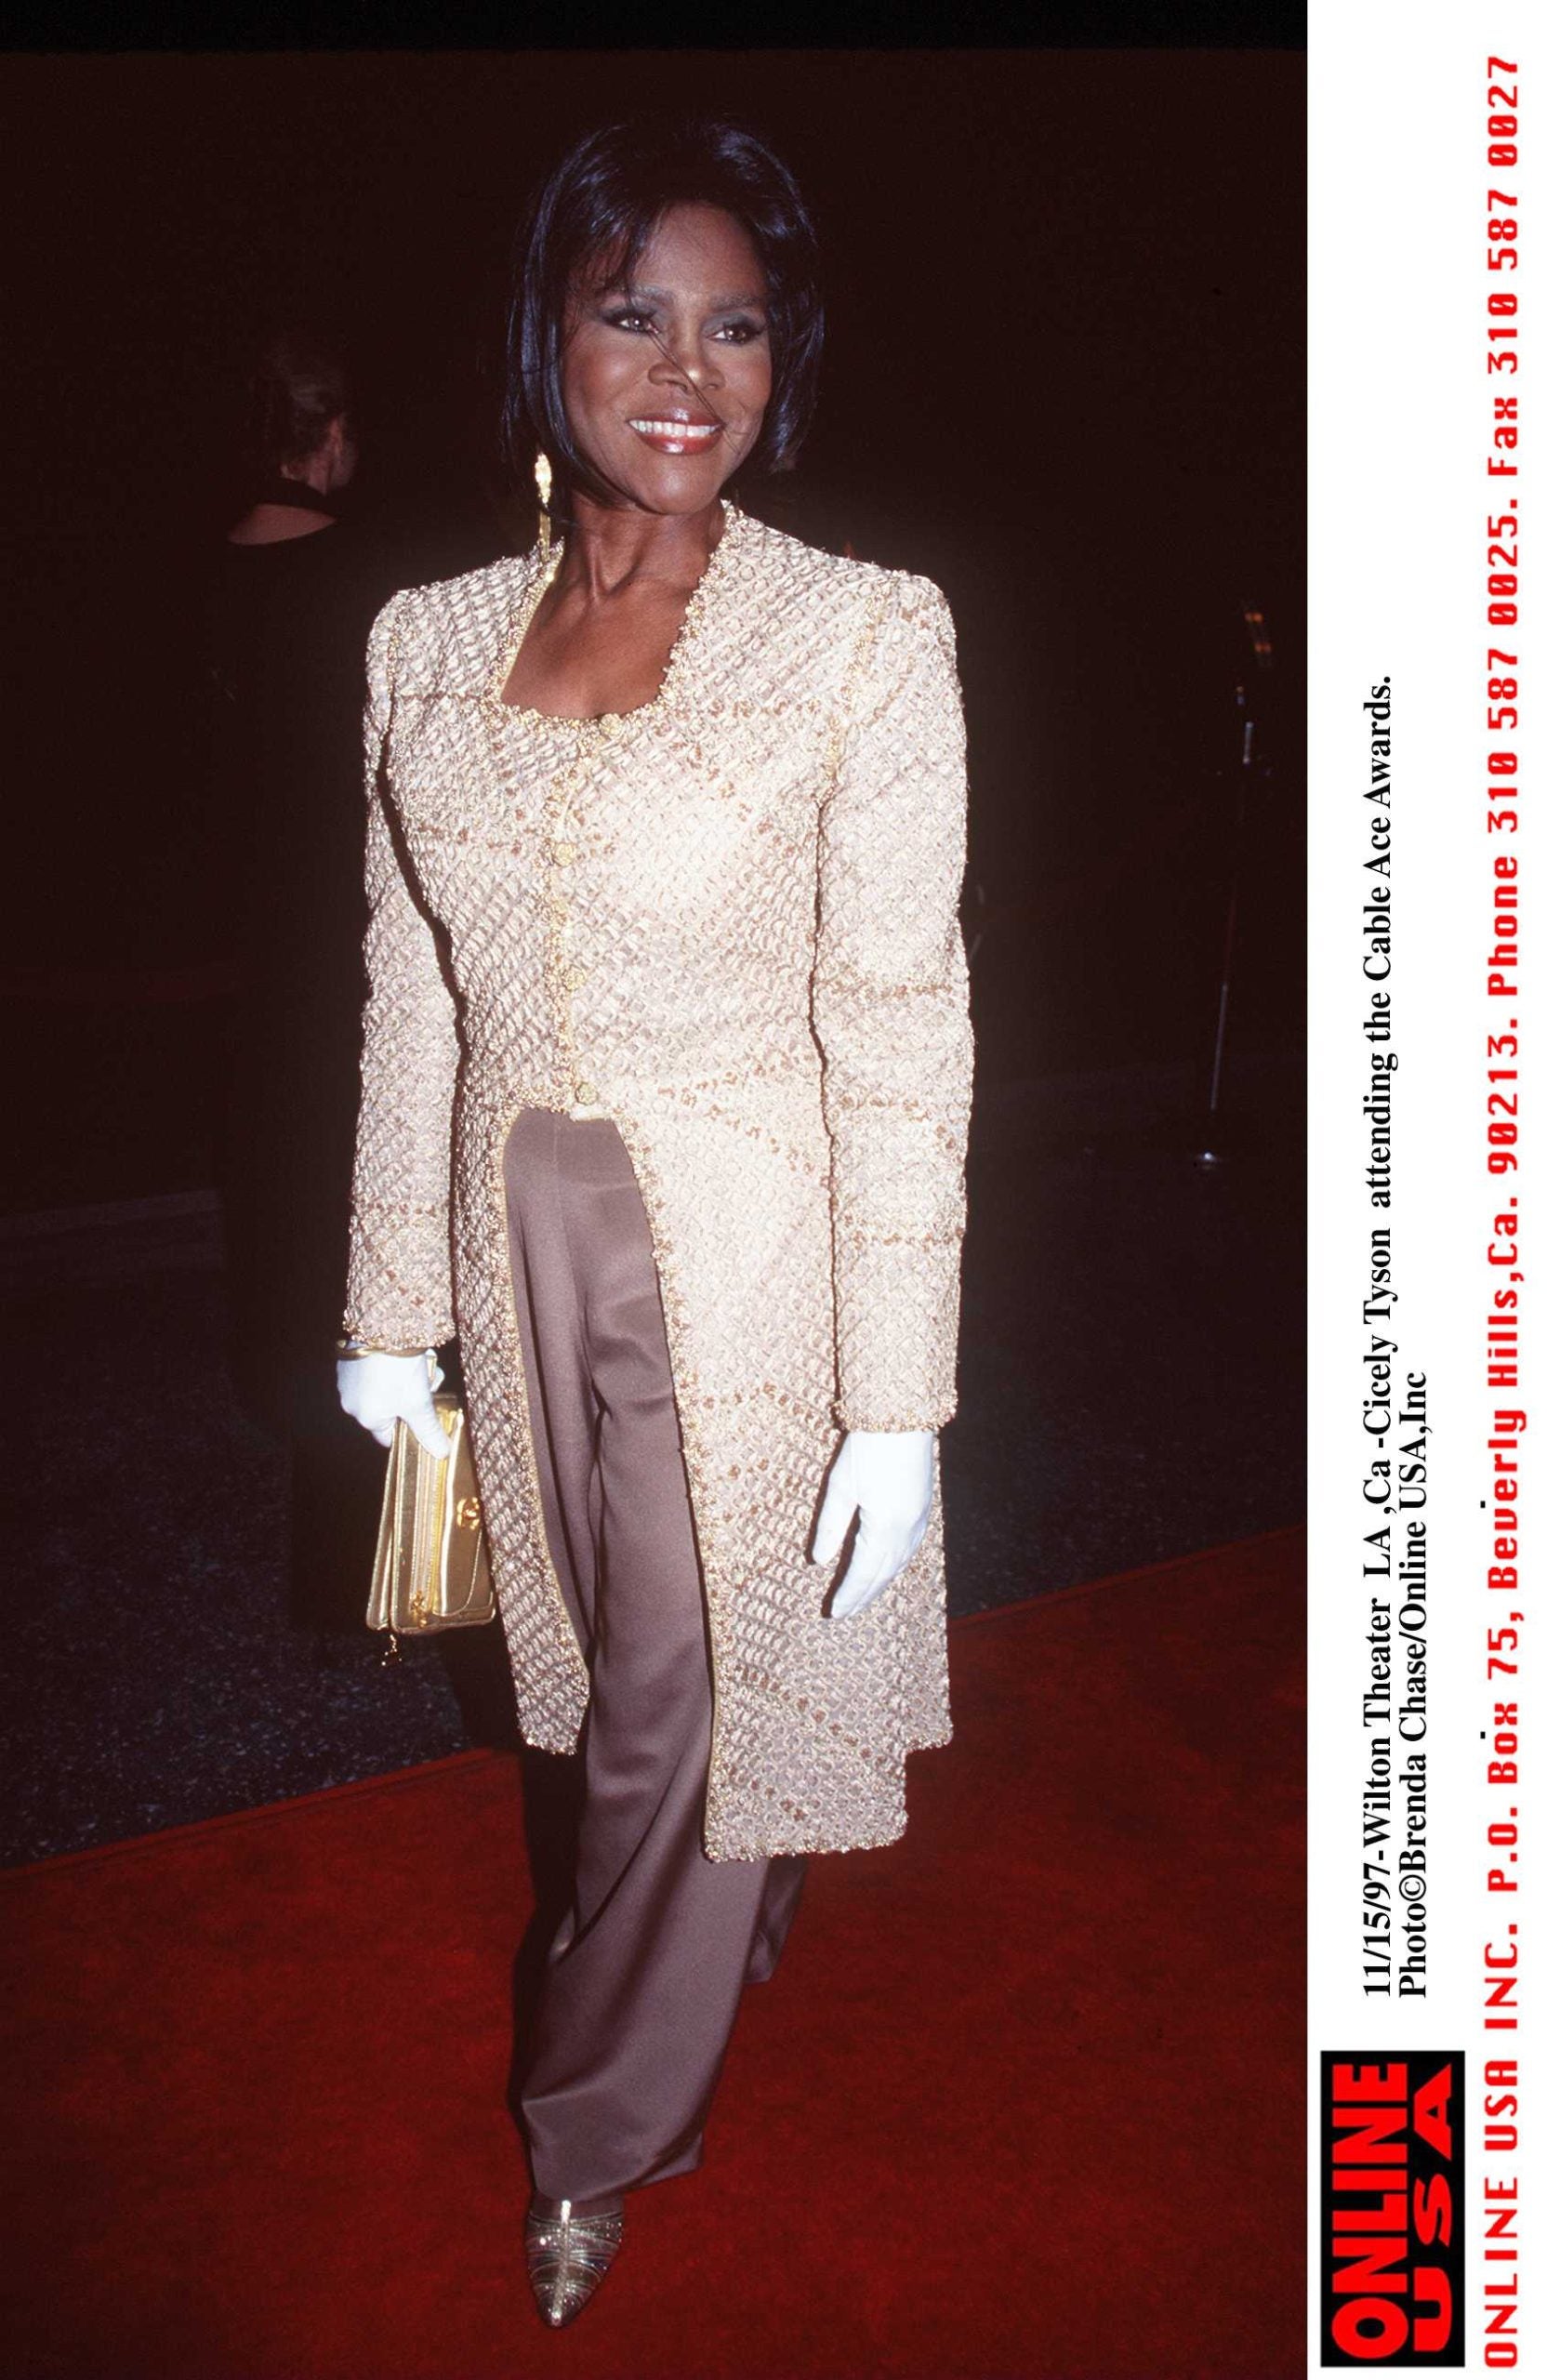 Cicely Tyson’s Most Inspiring Beauty Moments